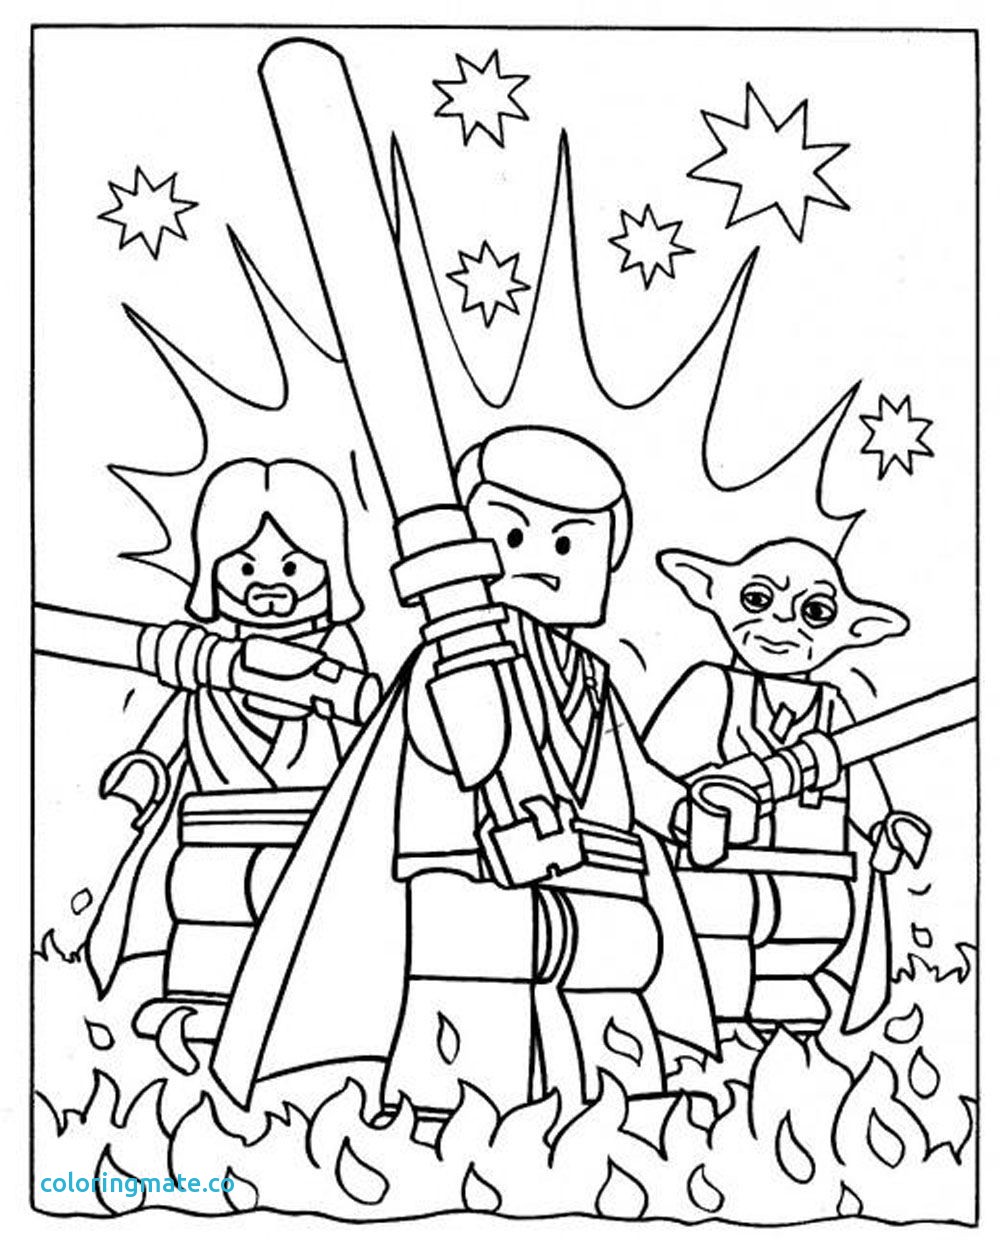 Lego Stormtrooper Coloring Pages at